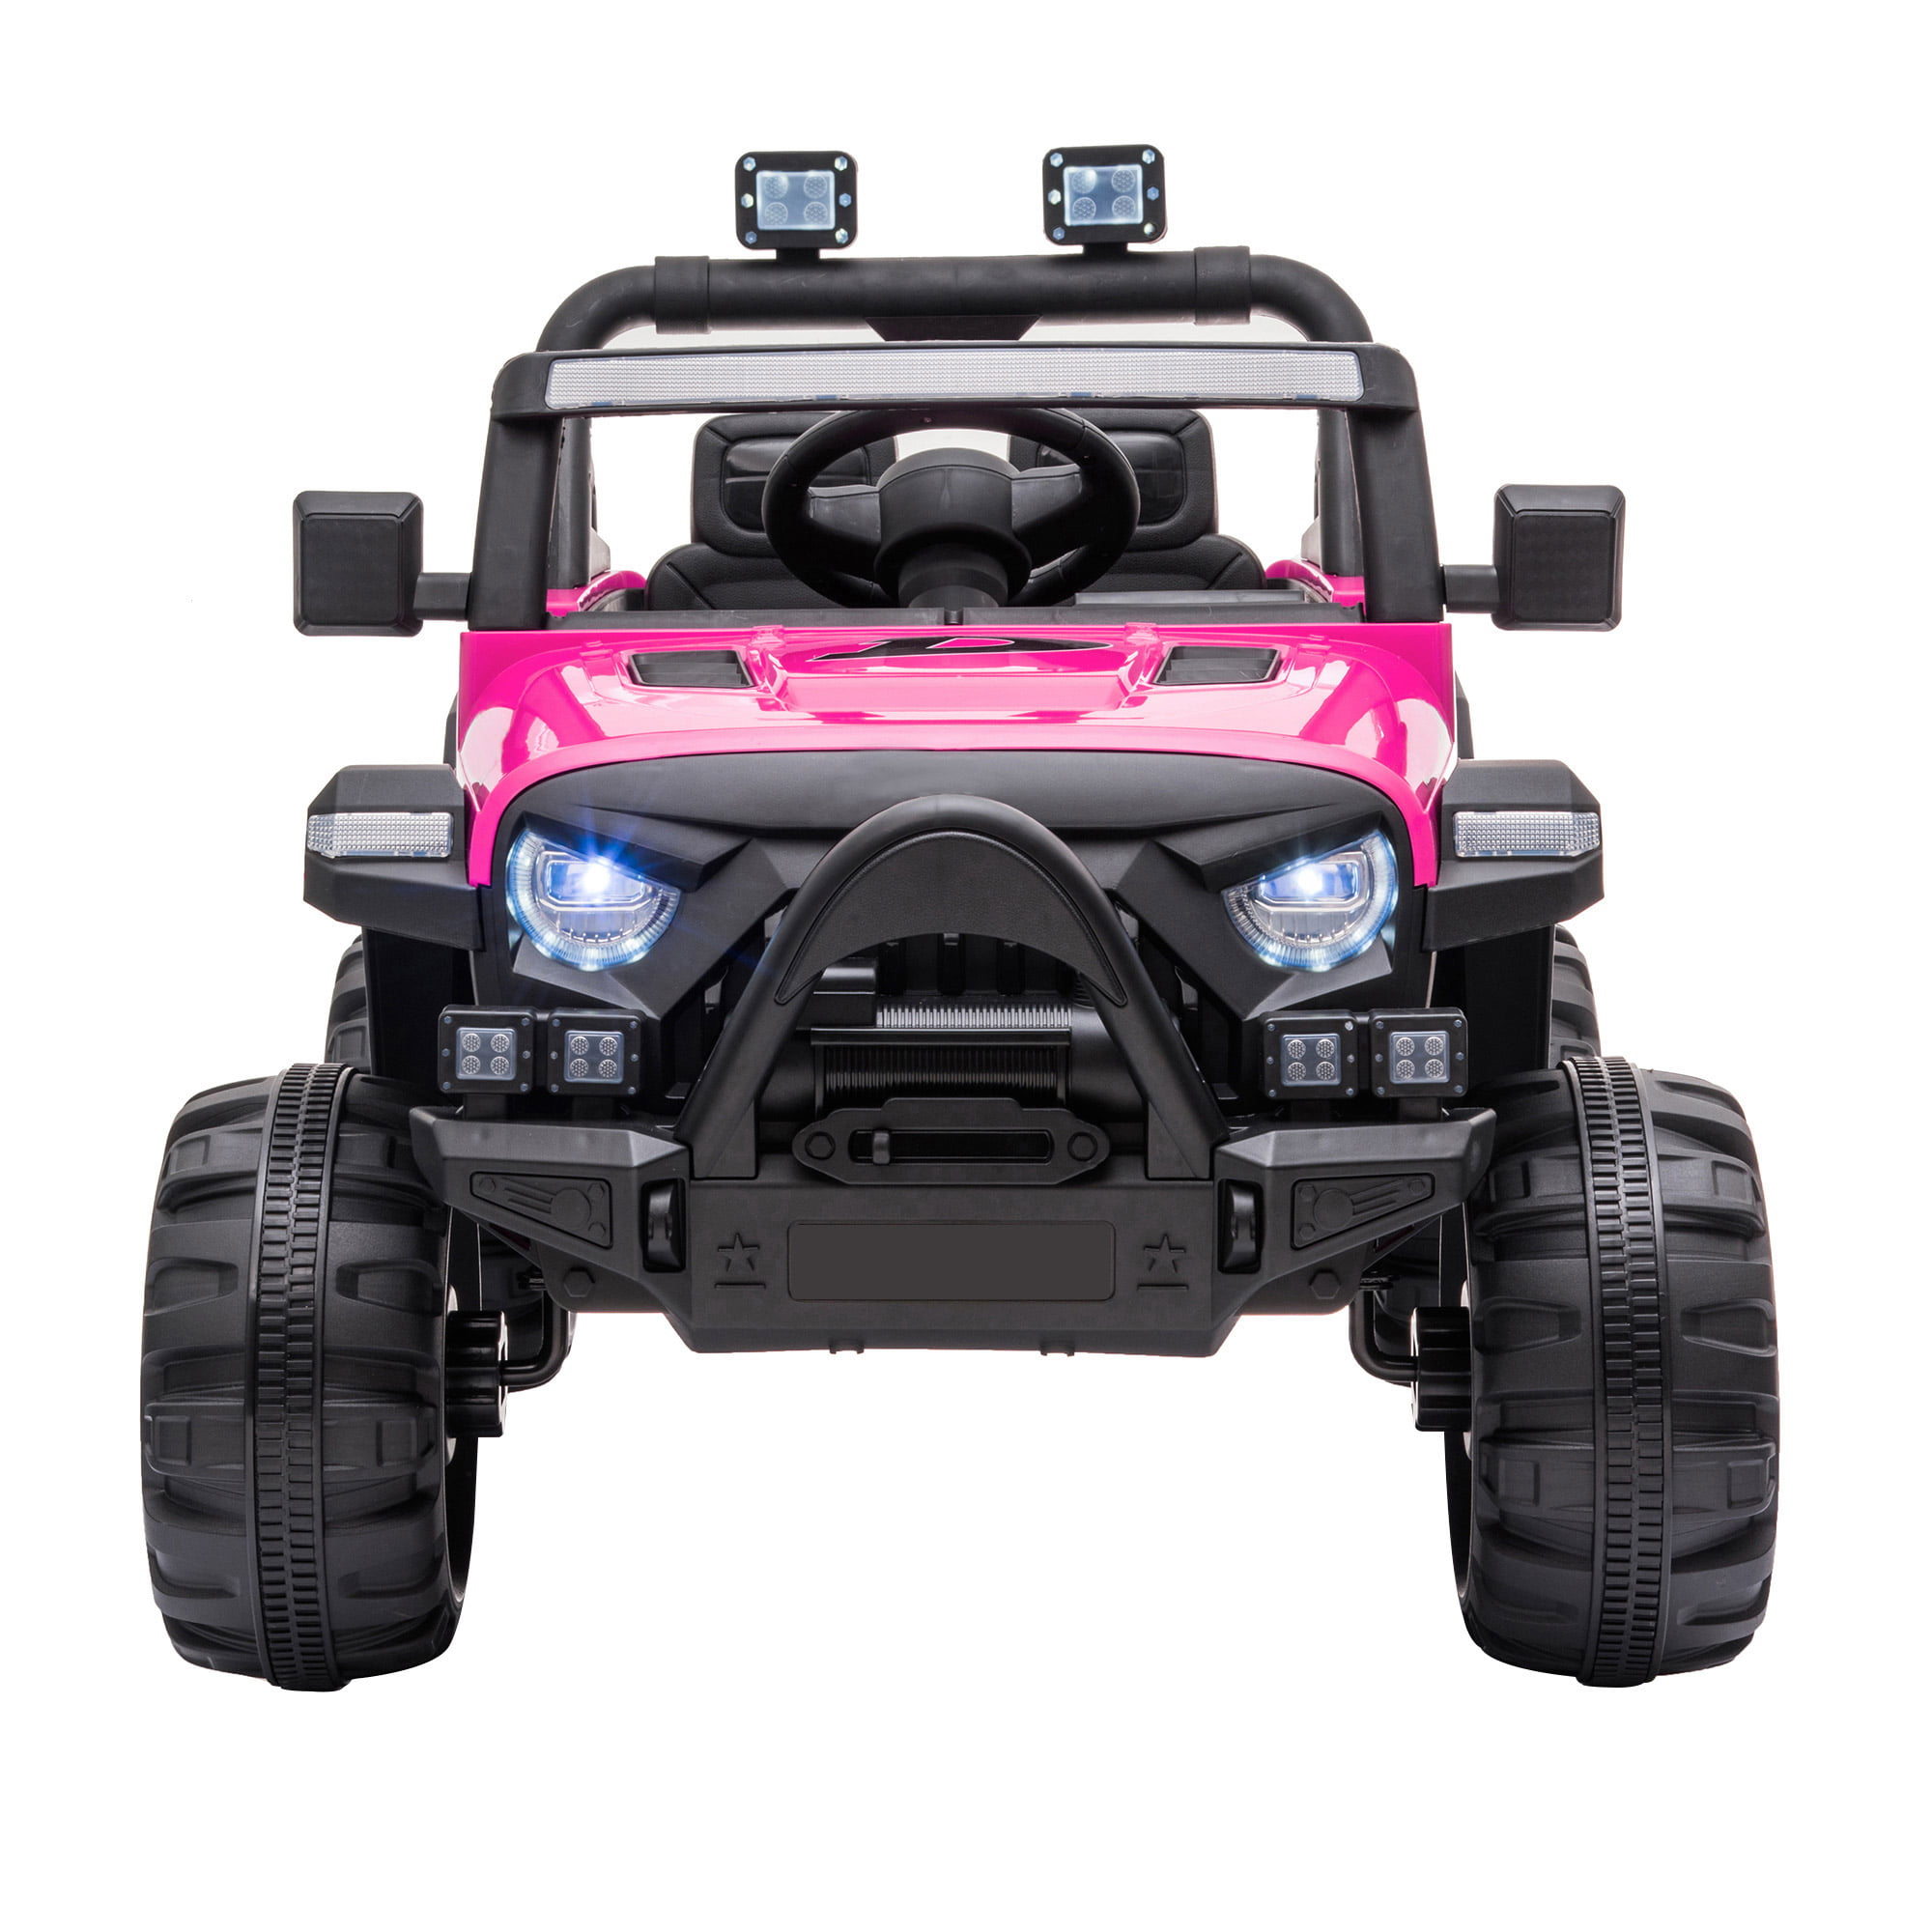 Ride on Car with Remote Control, Power Ride on Toys Car with Big Wheels, Spring Suspension, Led Lights, Music Player, Battery Cars for Kids, Rose Red All Terrain Ride on Truck Off-Road UTV, JA2728